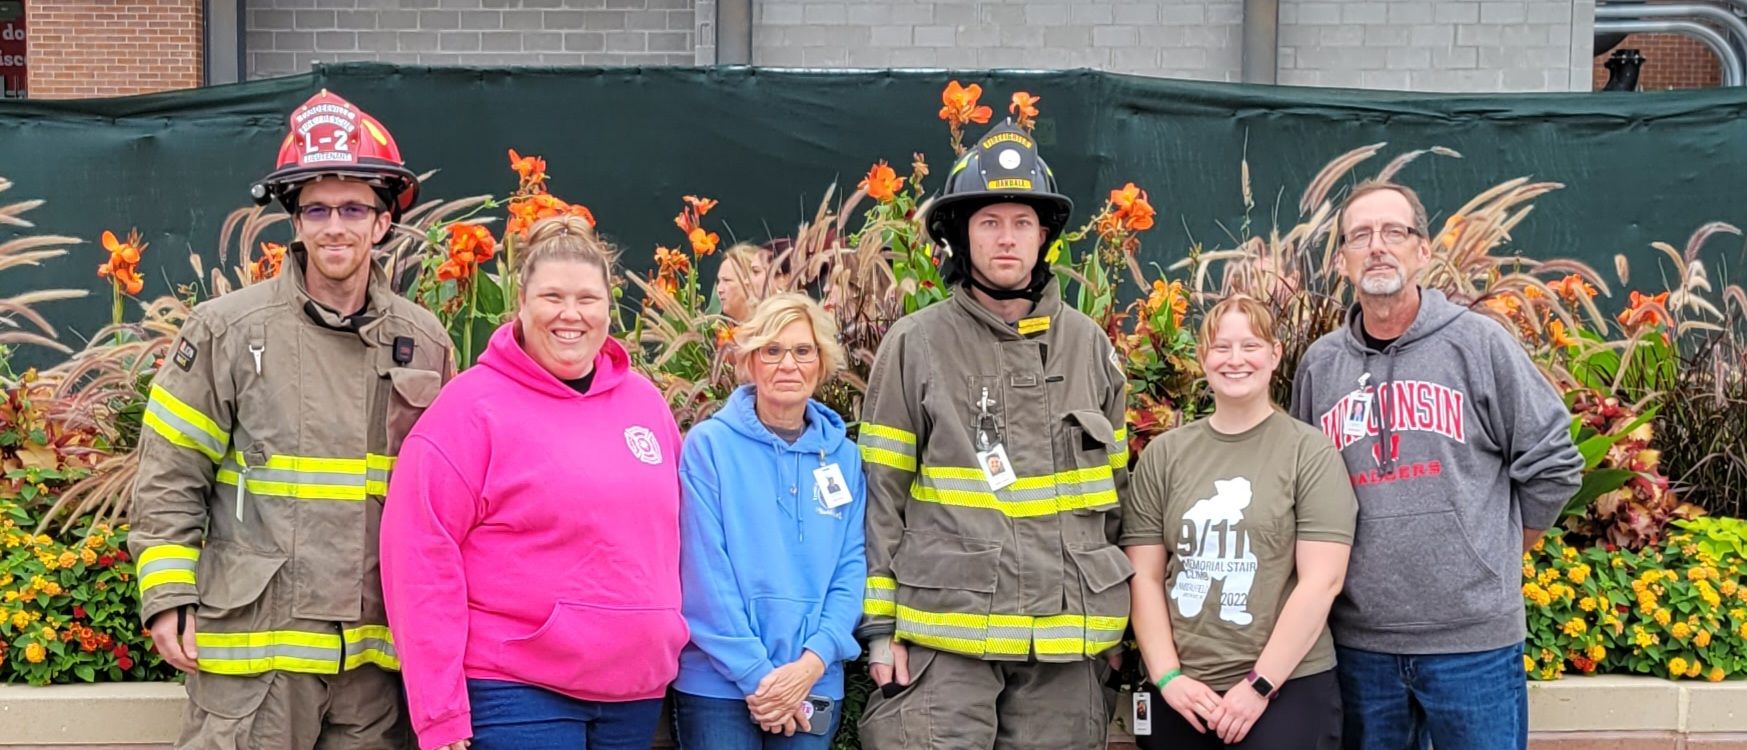 Krista's Aunt, Uncle and cousin's did the 9/11 Stair climb in Green Bay.